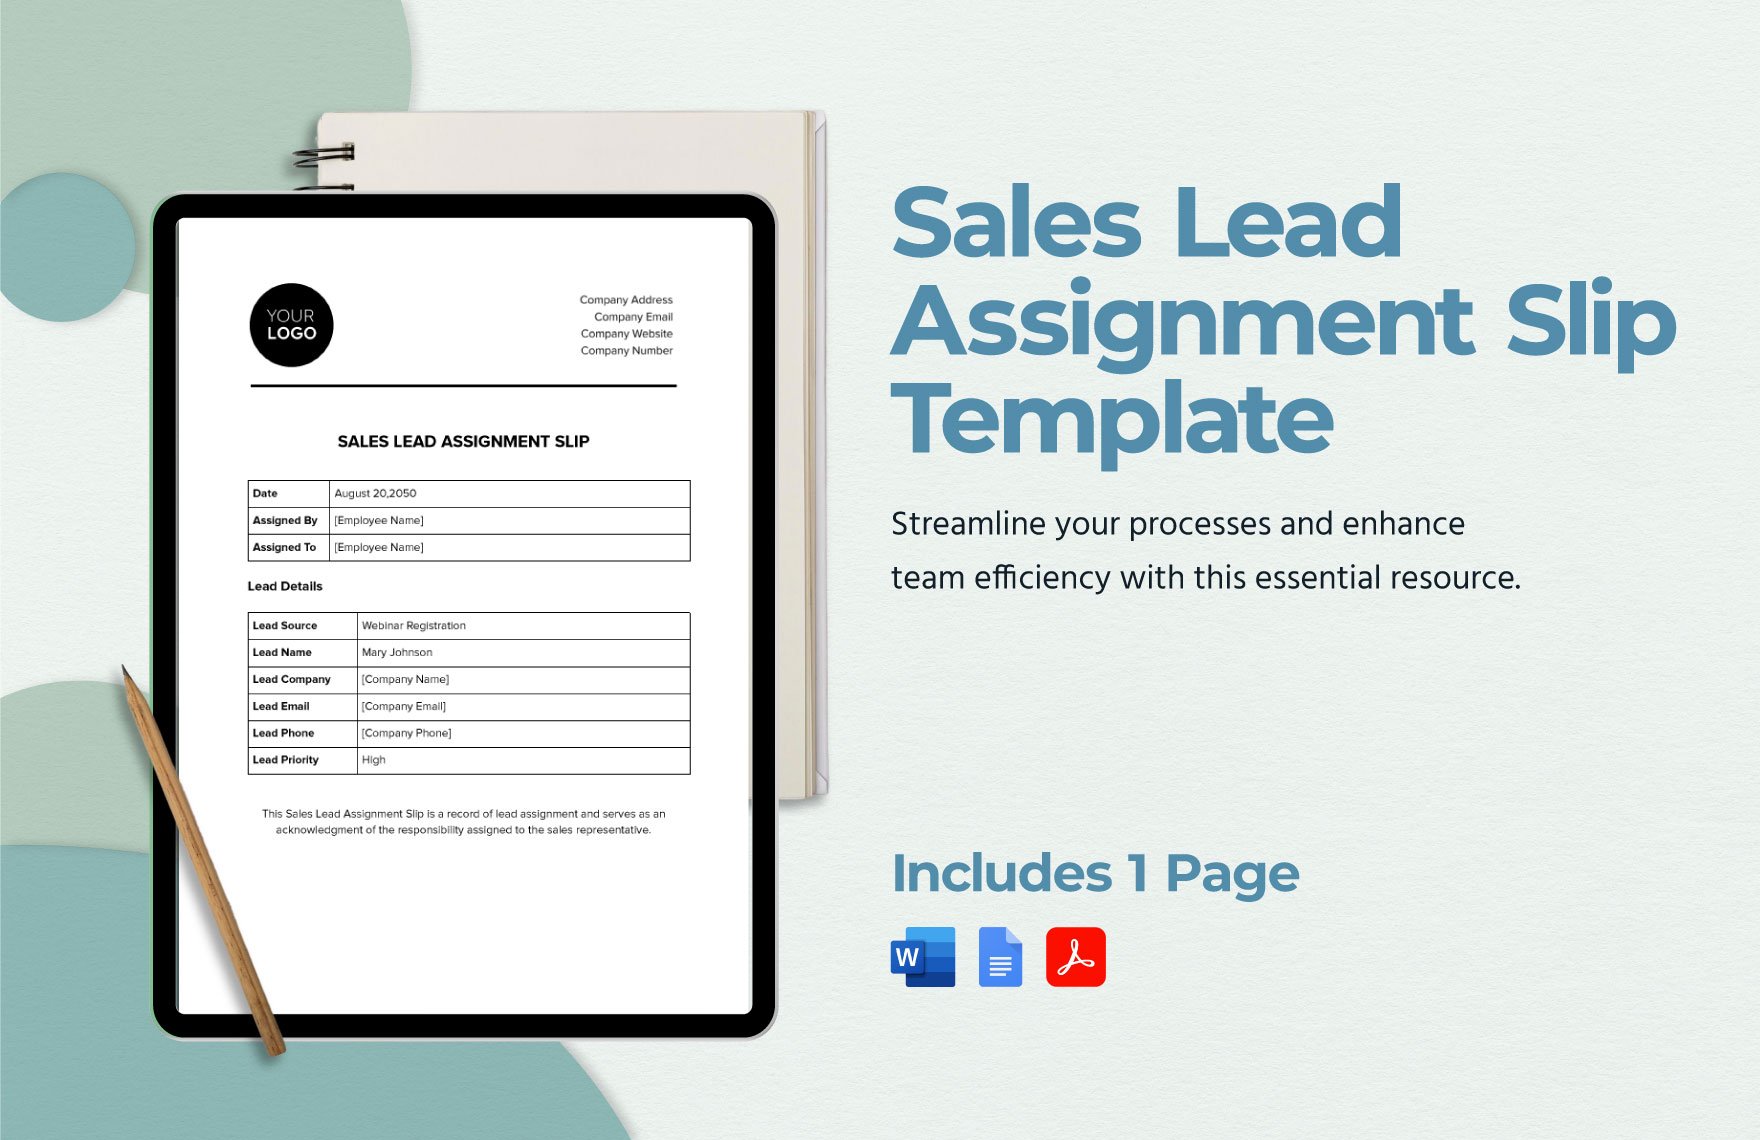 Sales Lead Assignment Slip Template in Word, Google Docs, PDF